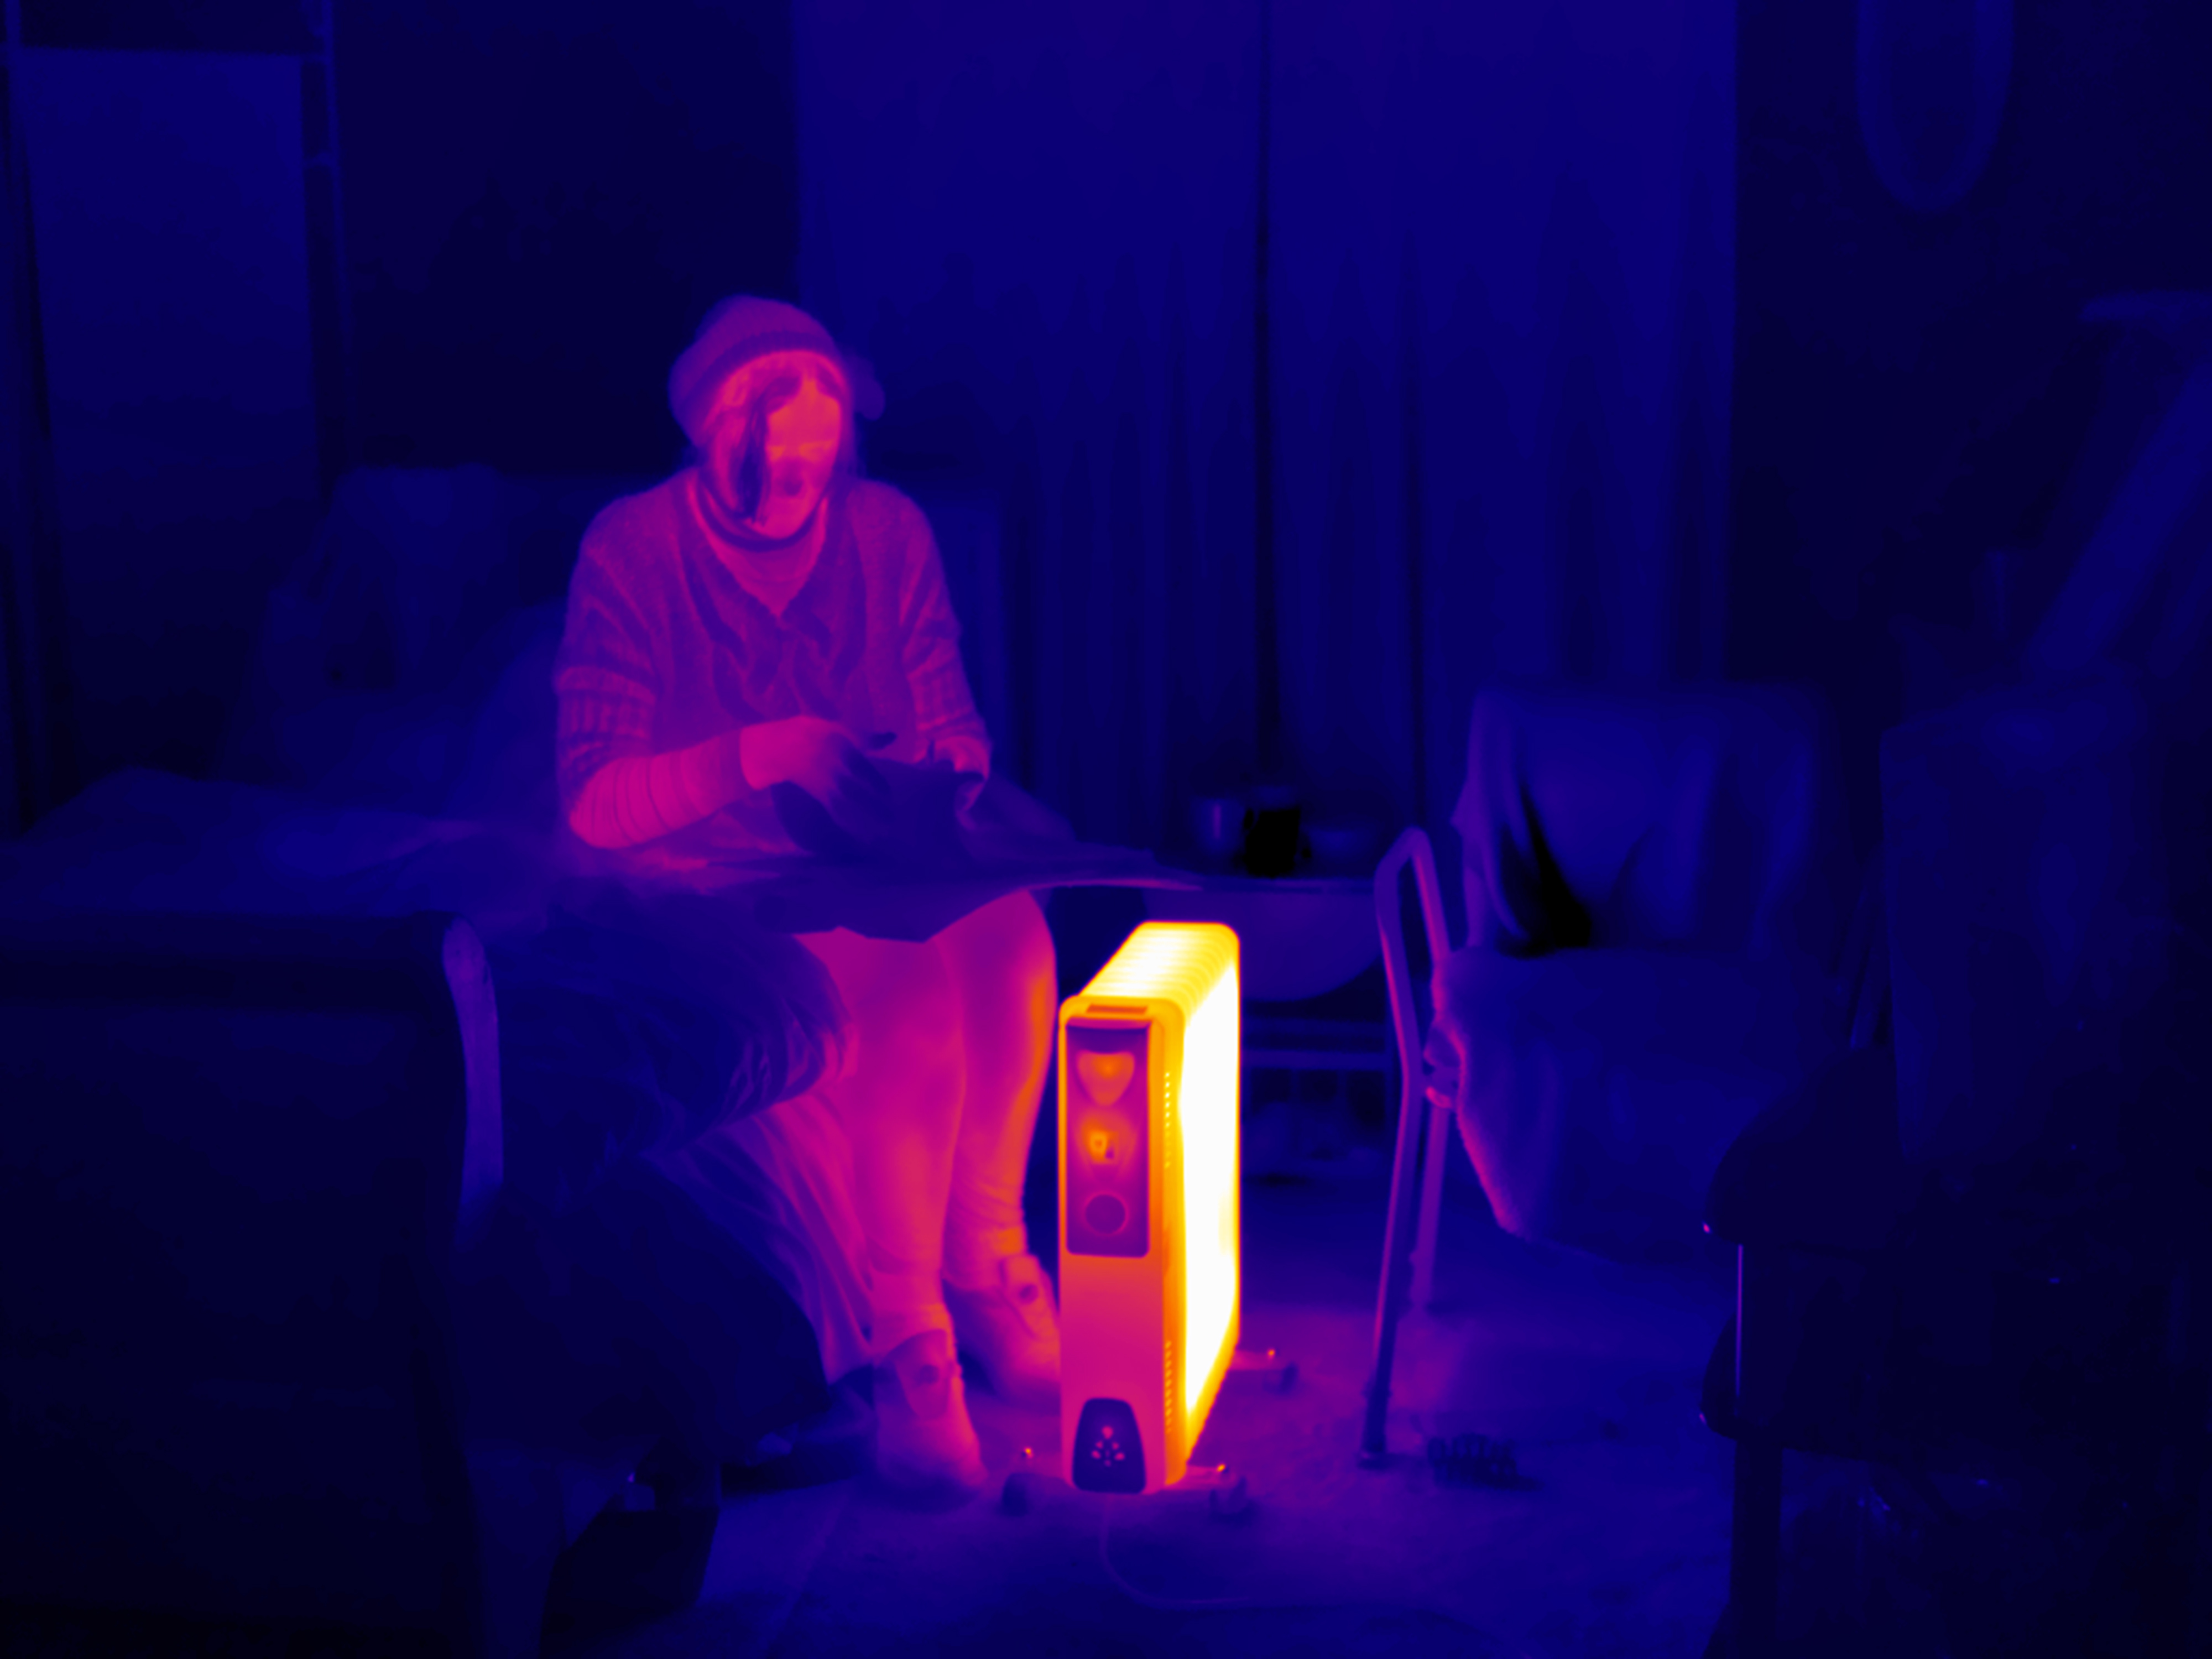 Thermal image of a woman trying to keep warm in her home